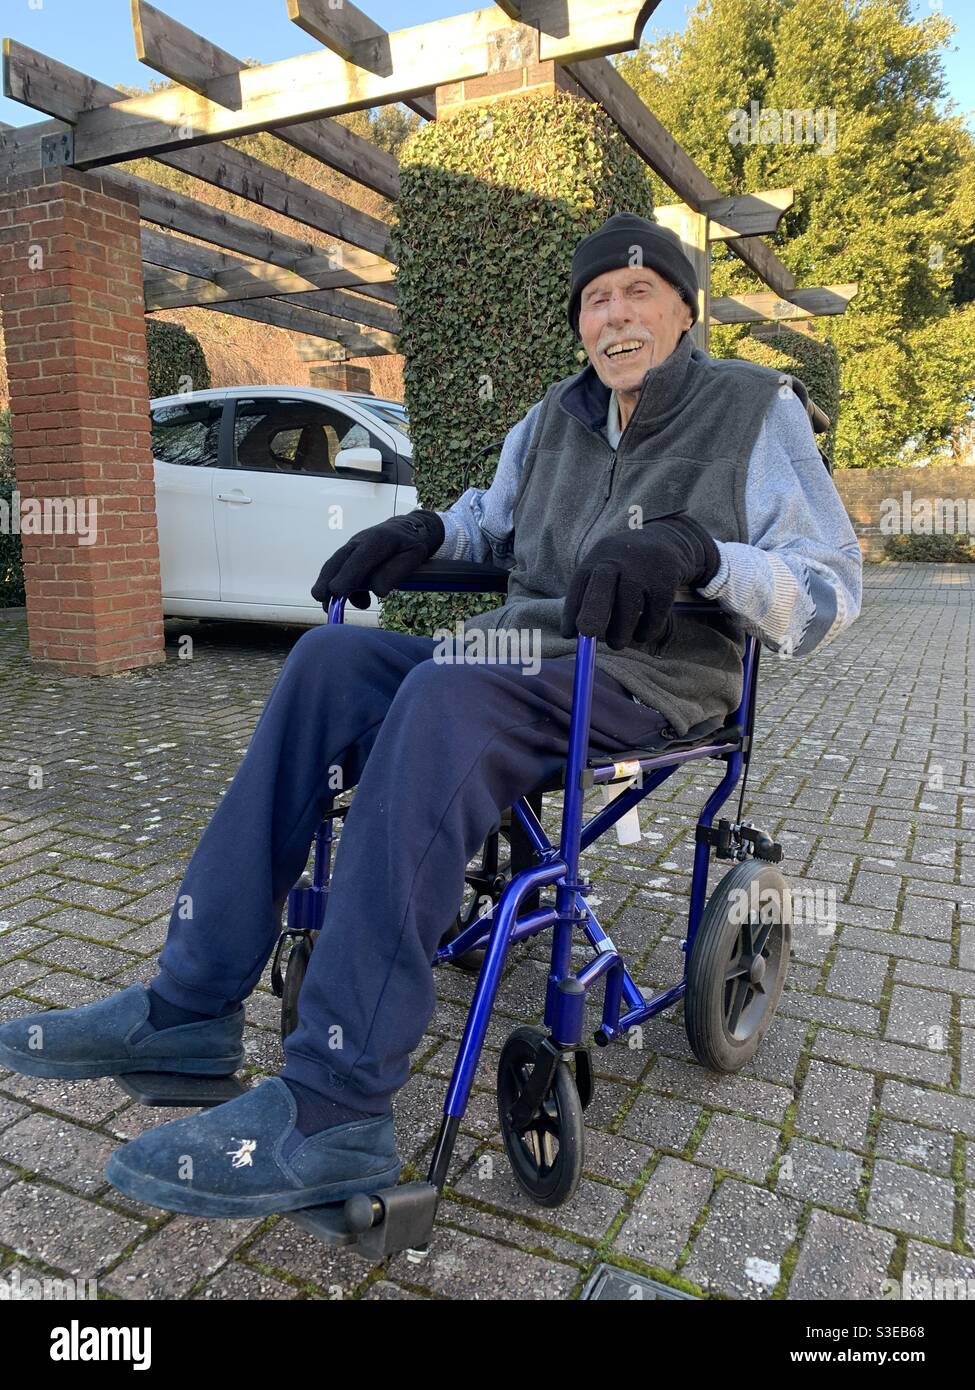 Smiling nonagenarian man of 96 years old enjoying an outing and smiling in his wheelchairs on a cold and bright winter’s day. Stock Photo